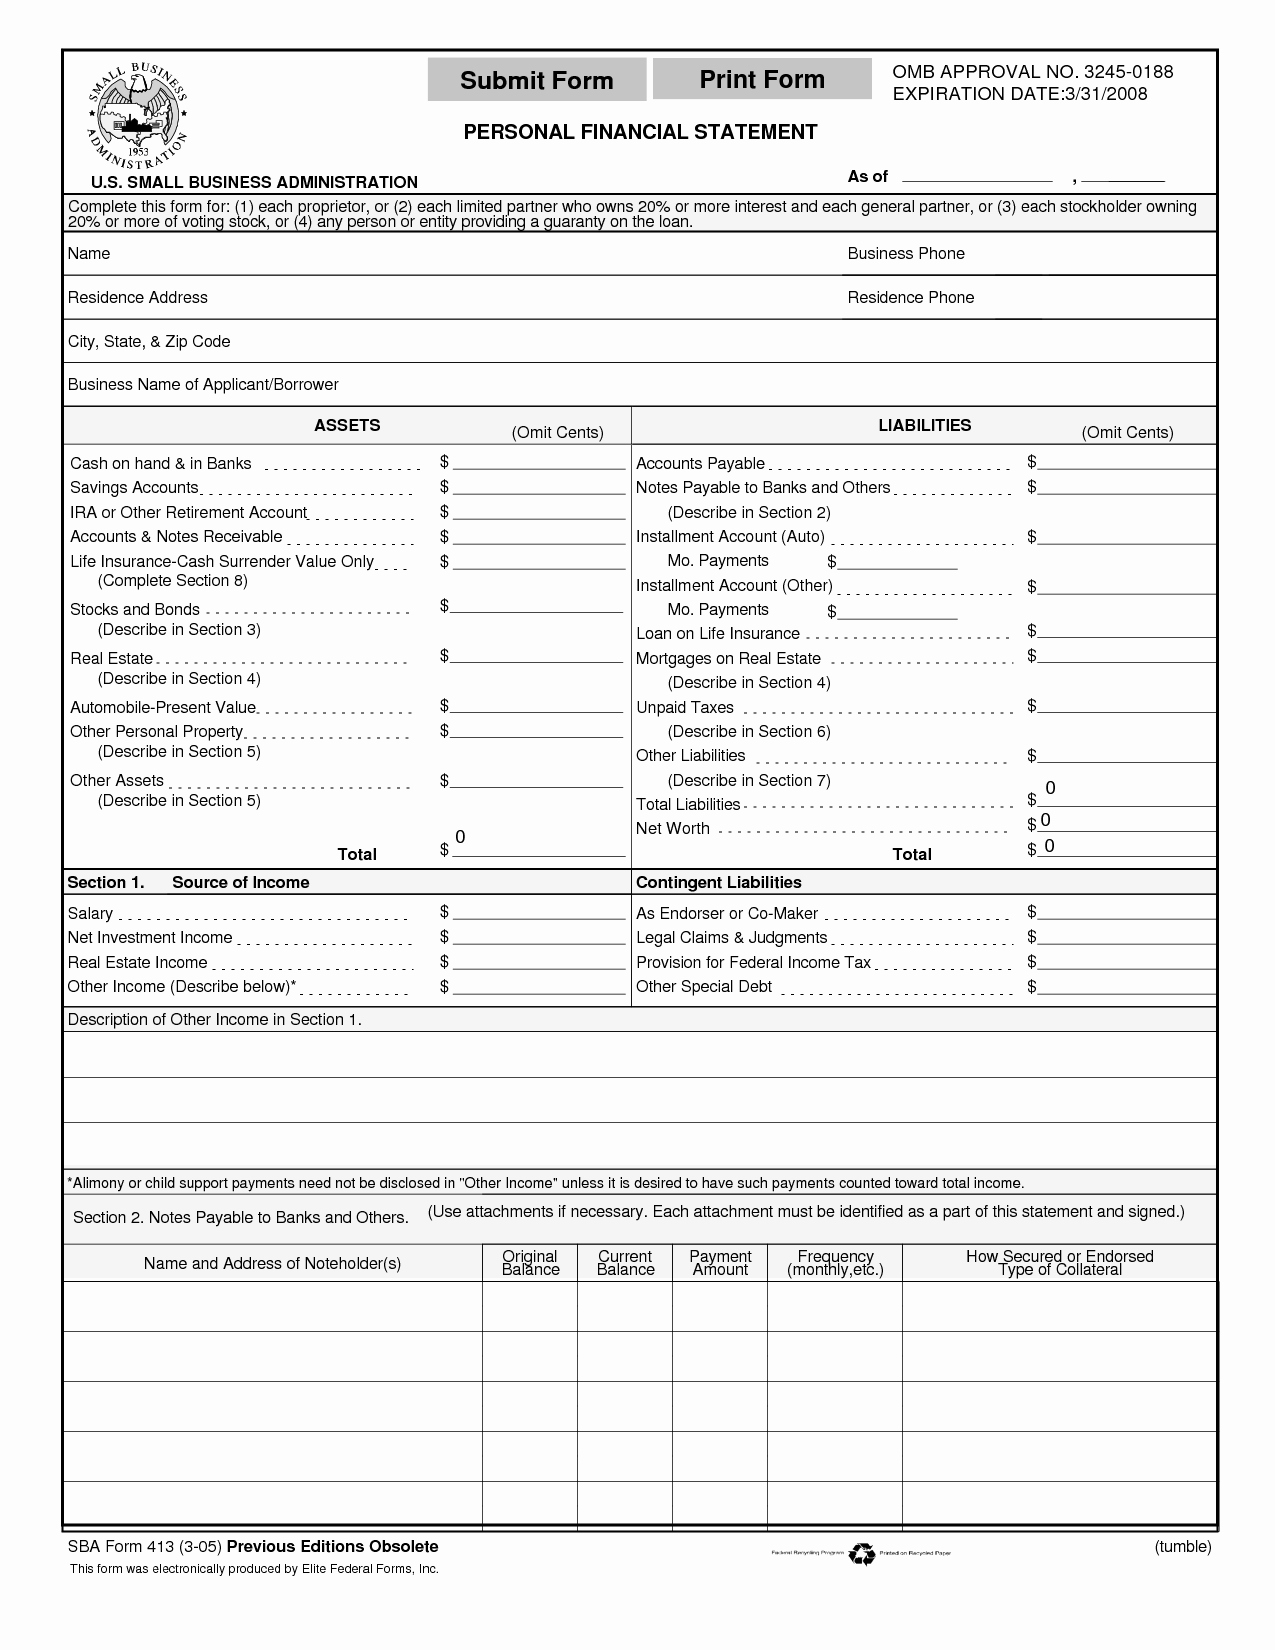 Personal Financial Plan Template New Print Personal Financial Statement form